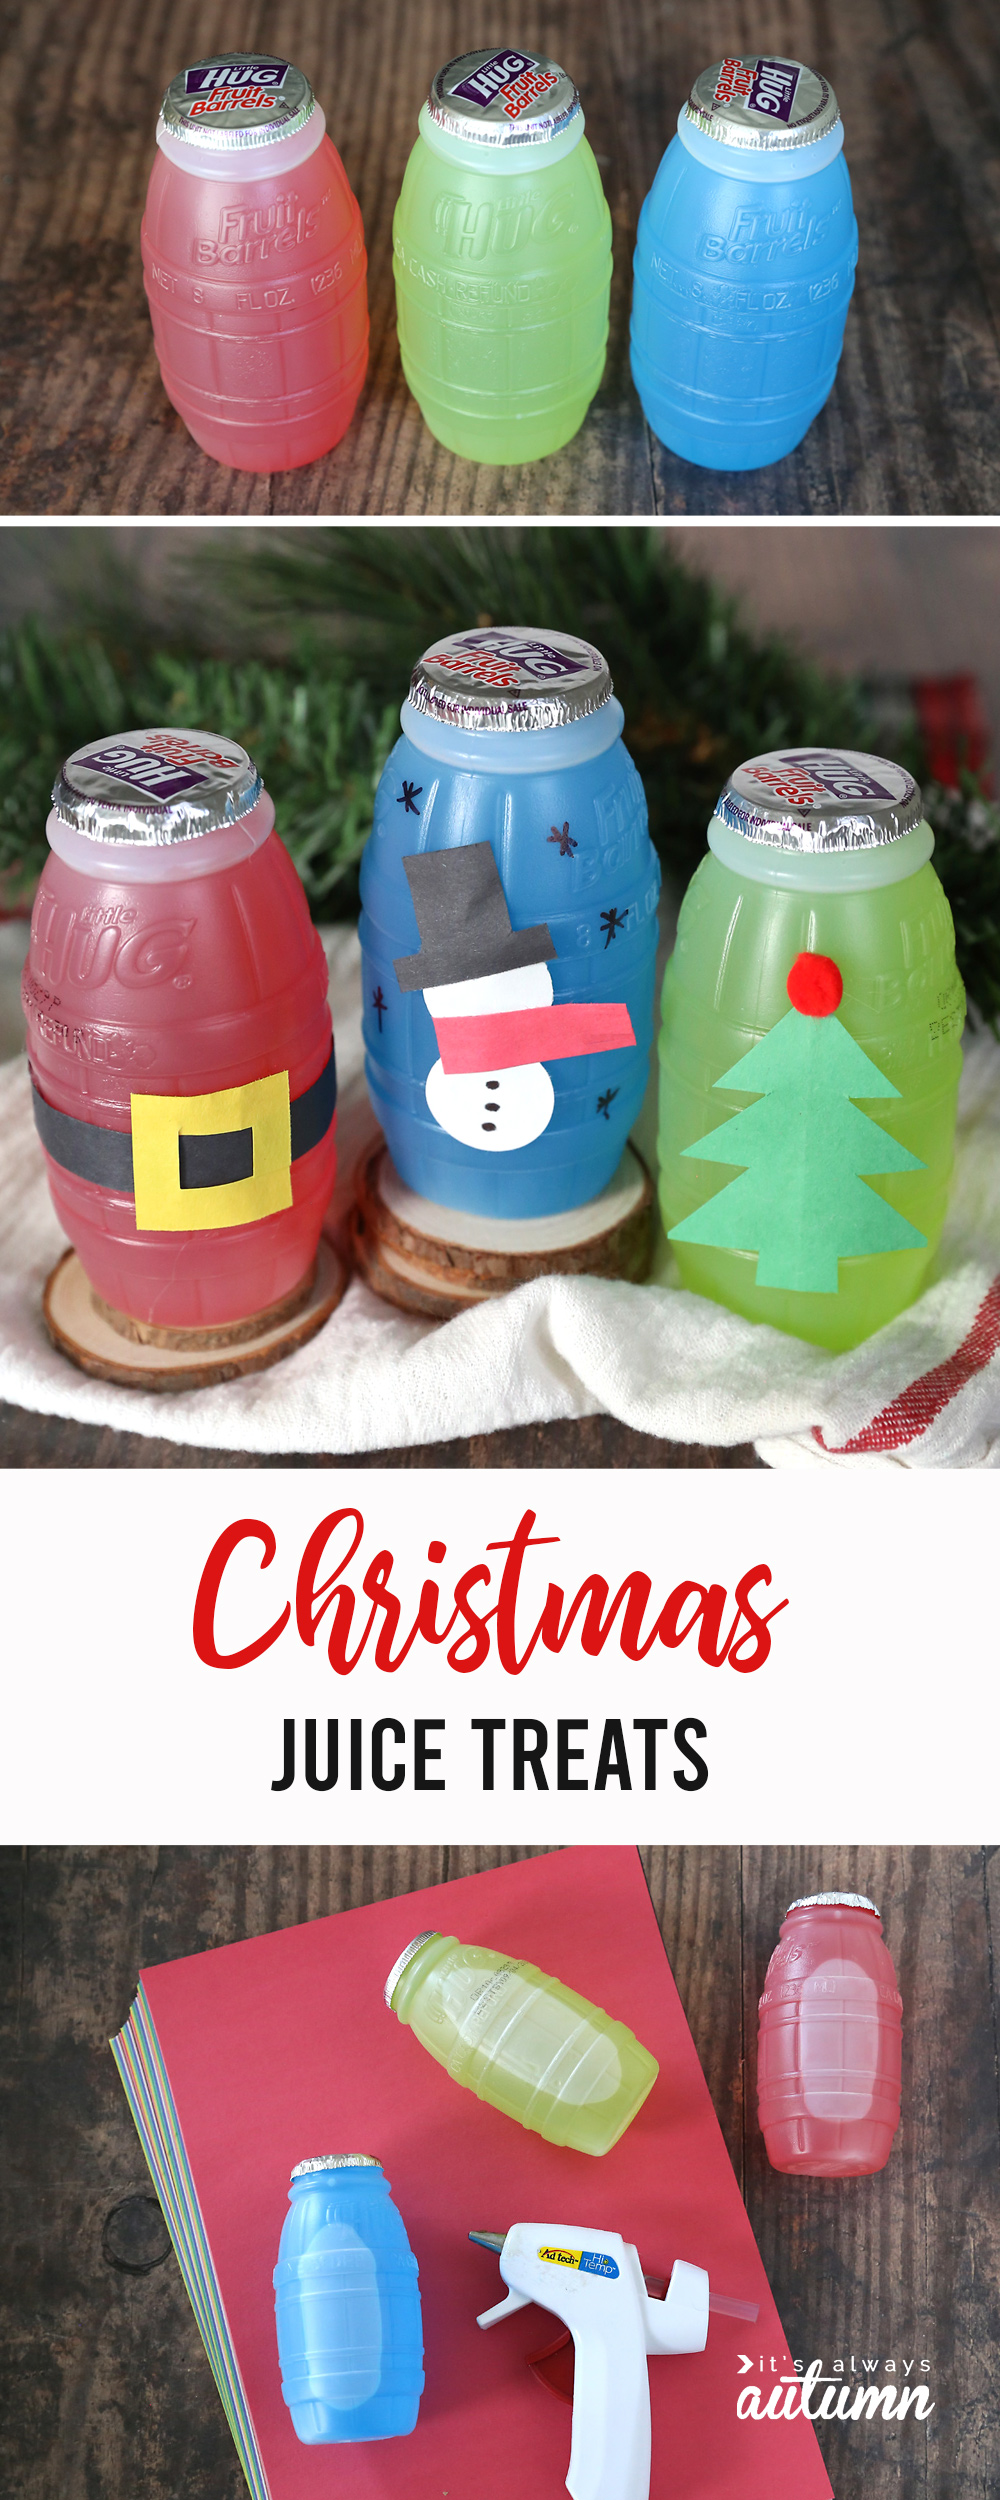 These adorable Christmas juice treats are an easy idea for classroom parties!